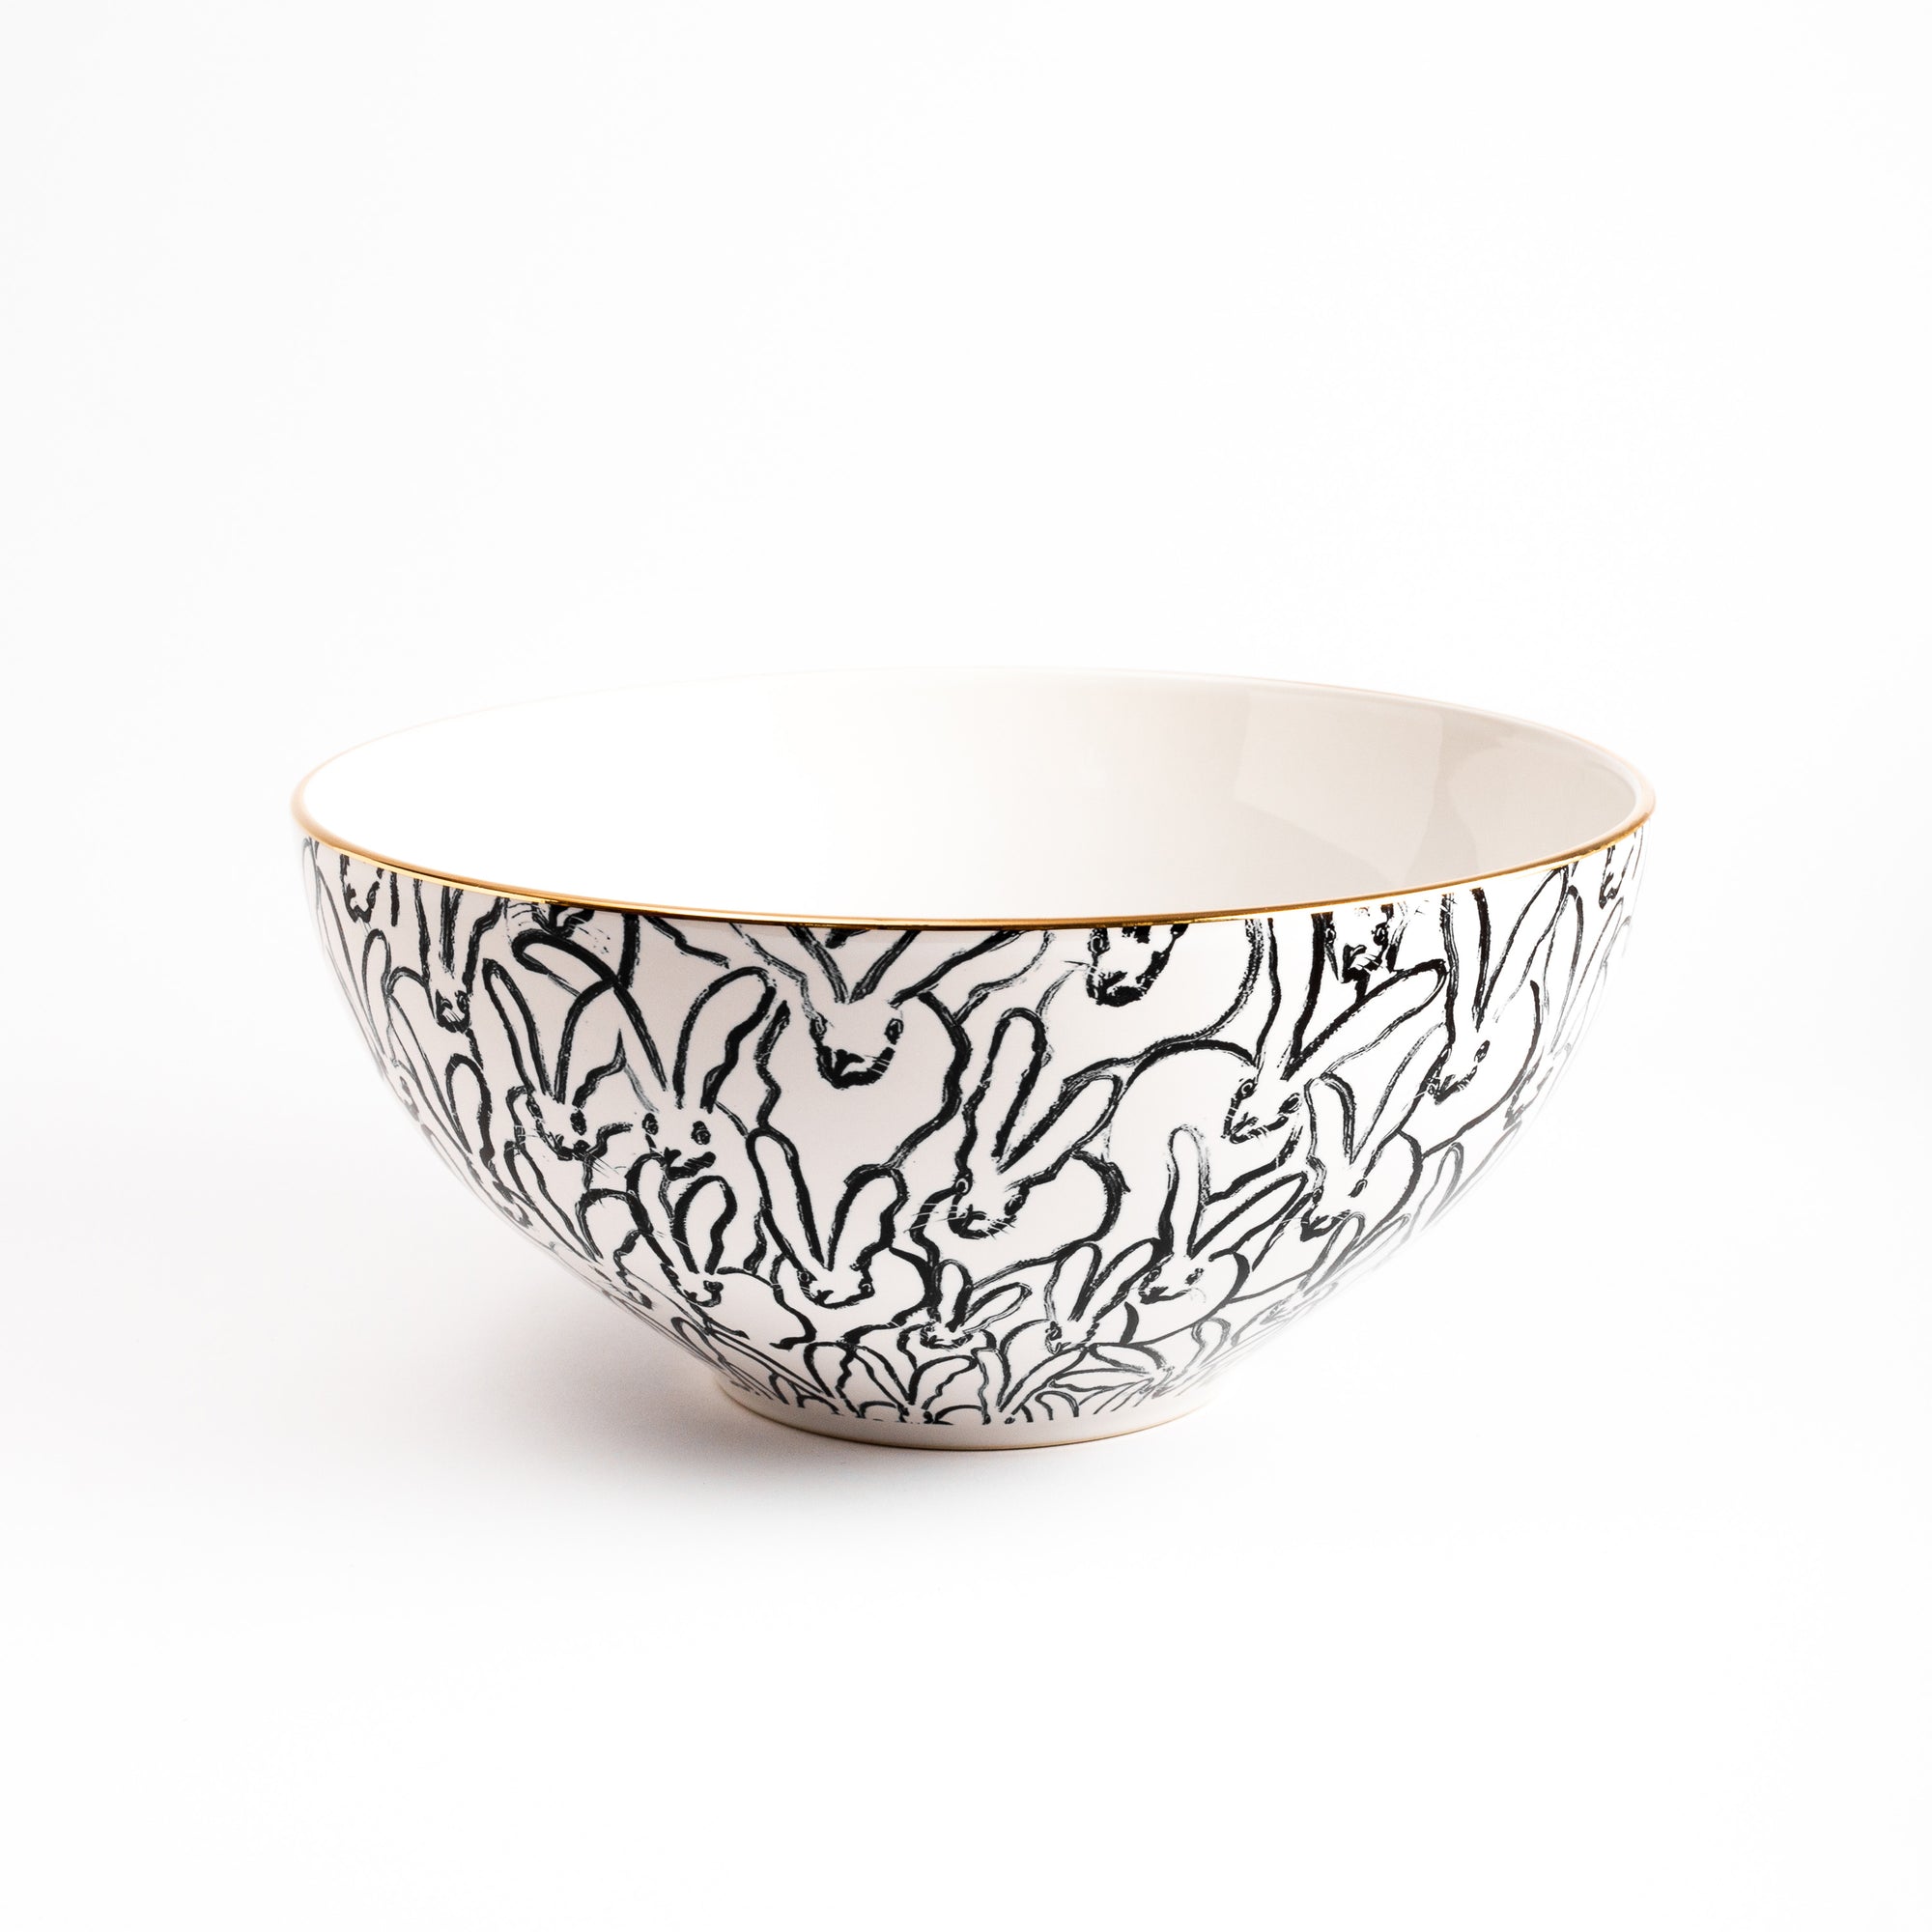 Rabbit Run Serving Bowl with Hand-Painted Gold Rim